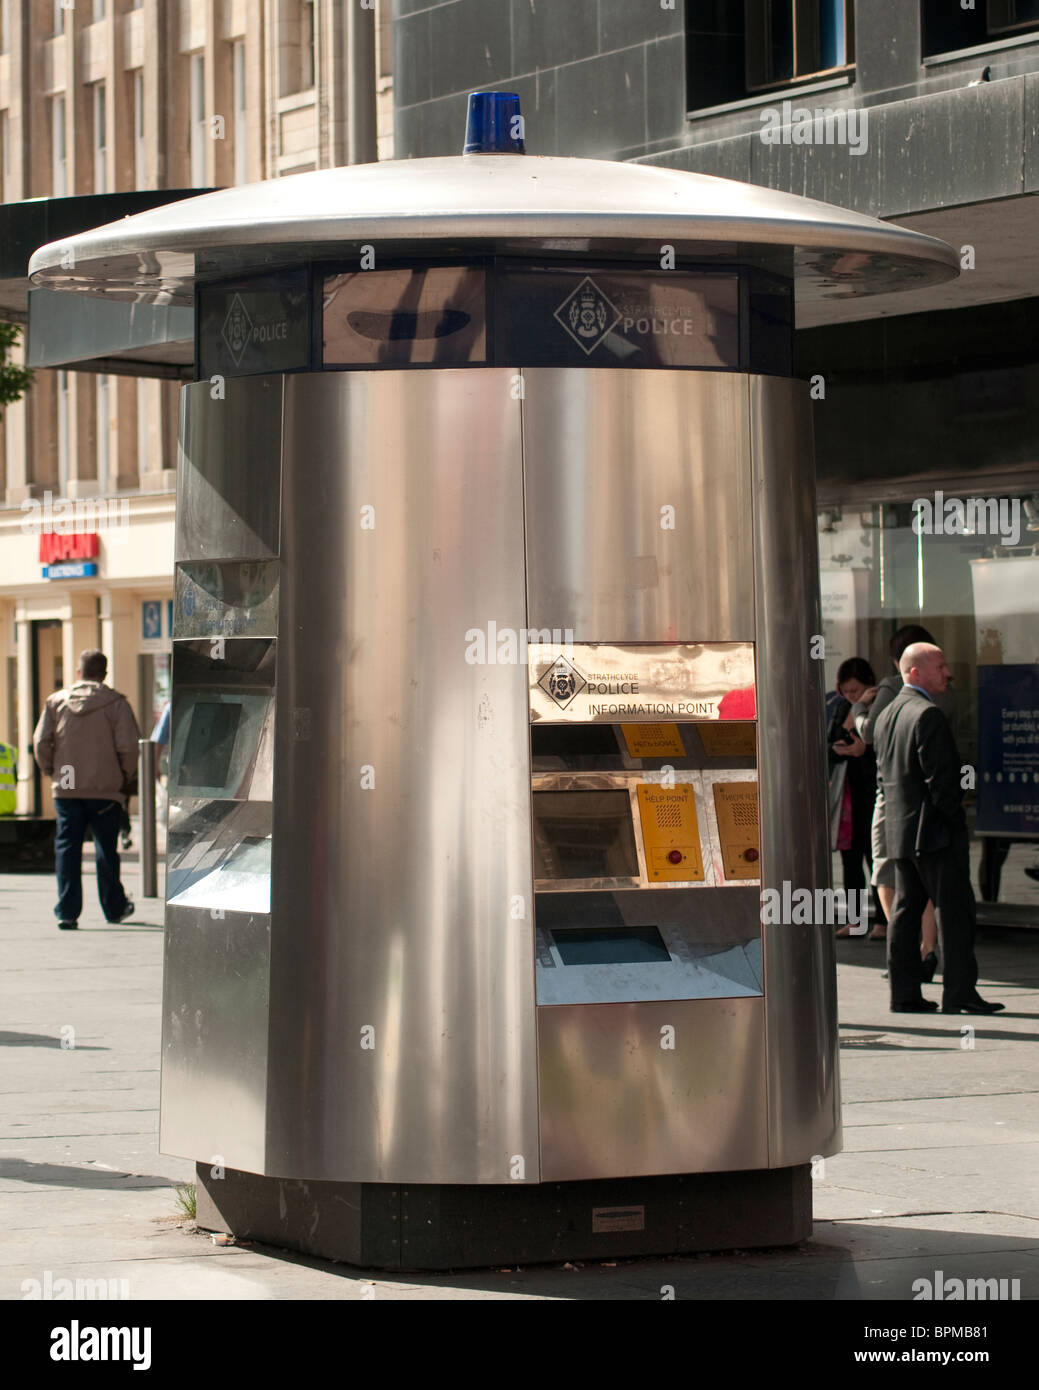 An automated Strathclyde Police information point in Glasgow city centre. Stock Photo